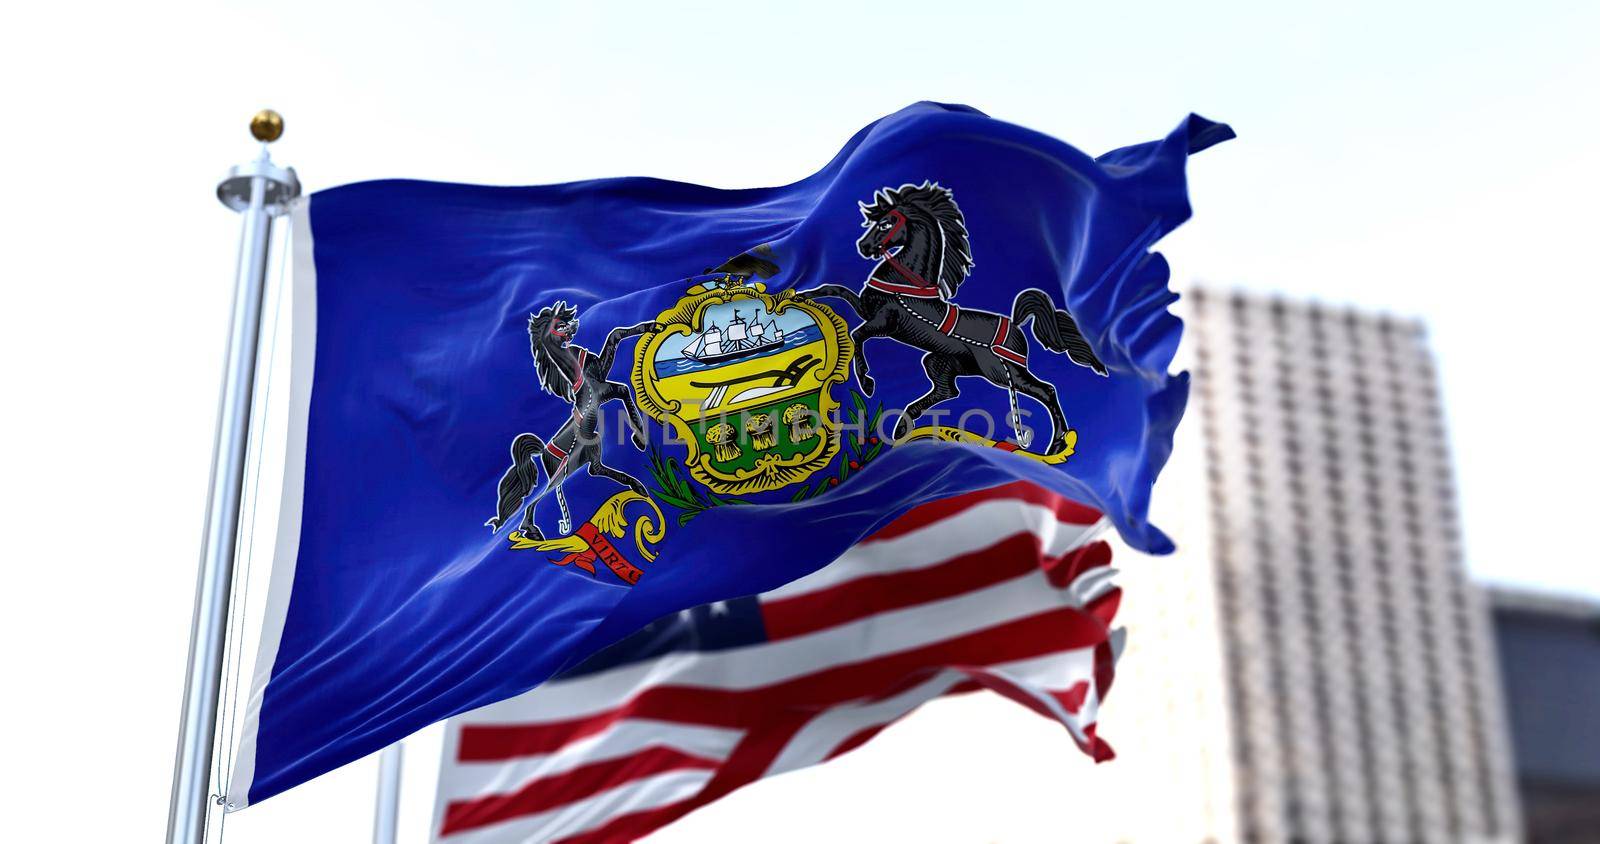 the flag of the US state of Pennsylvania waving in the wind with the American flag blurred in the background. Pennsylvania was admitted to the Union on December 12, 1787 as 2nd state